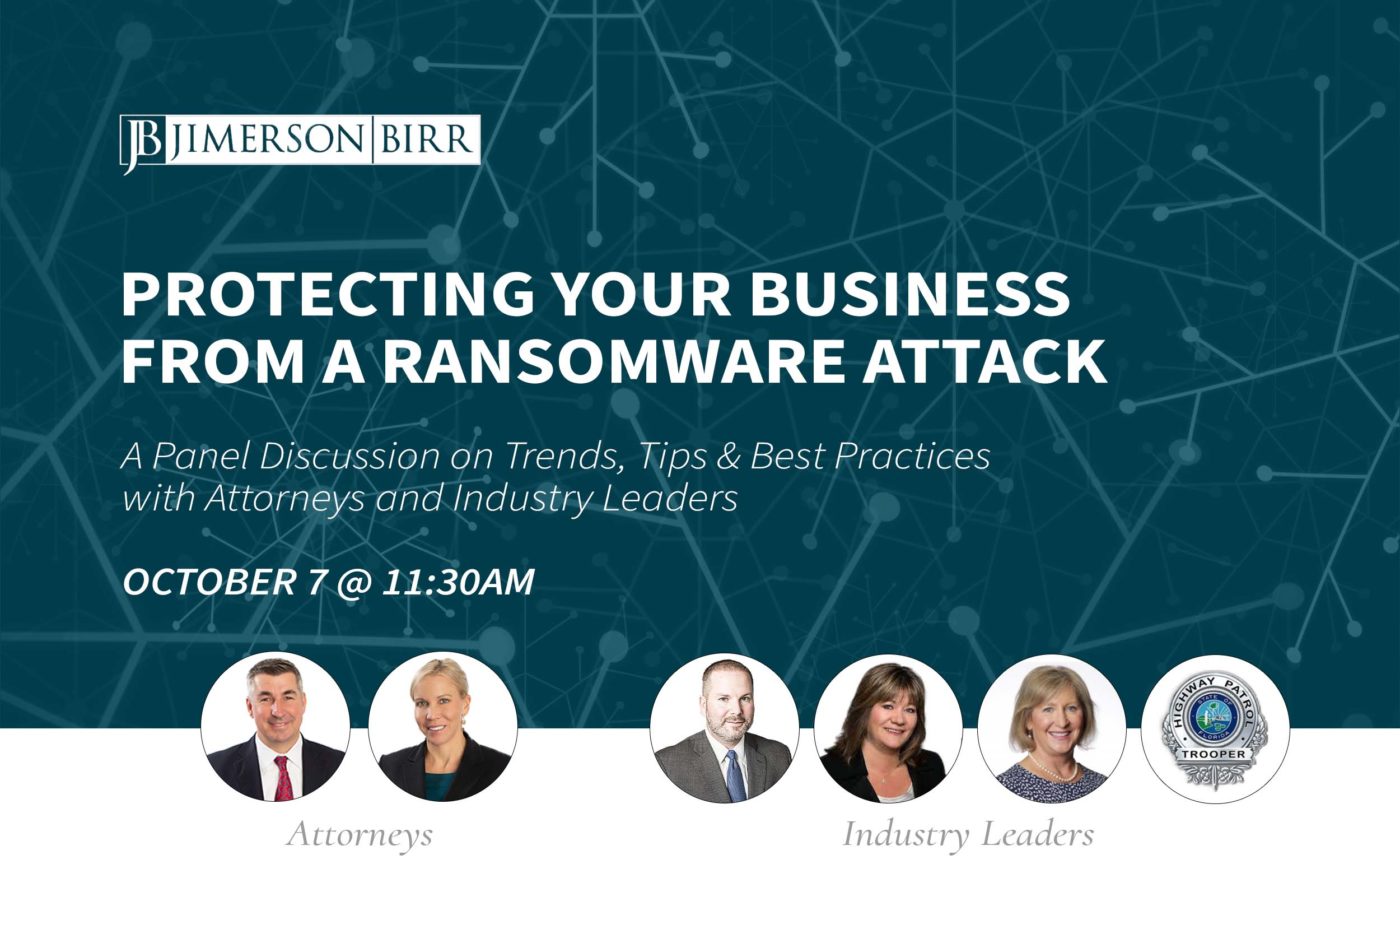 How to Protect Your Business From a Ransomware Attack